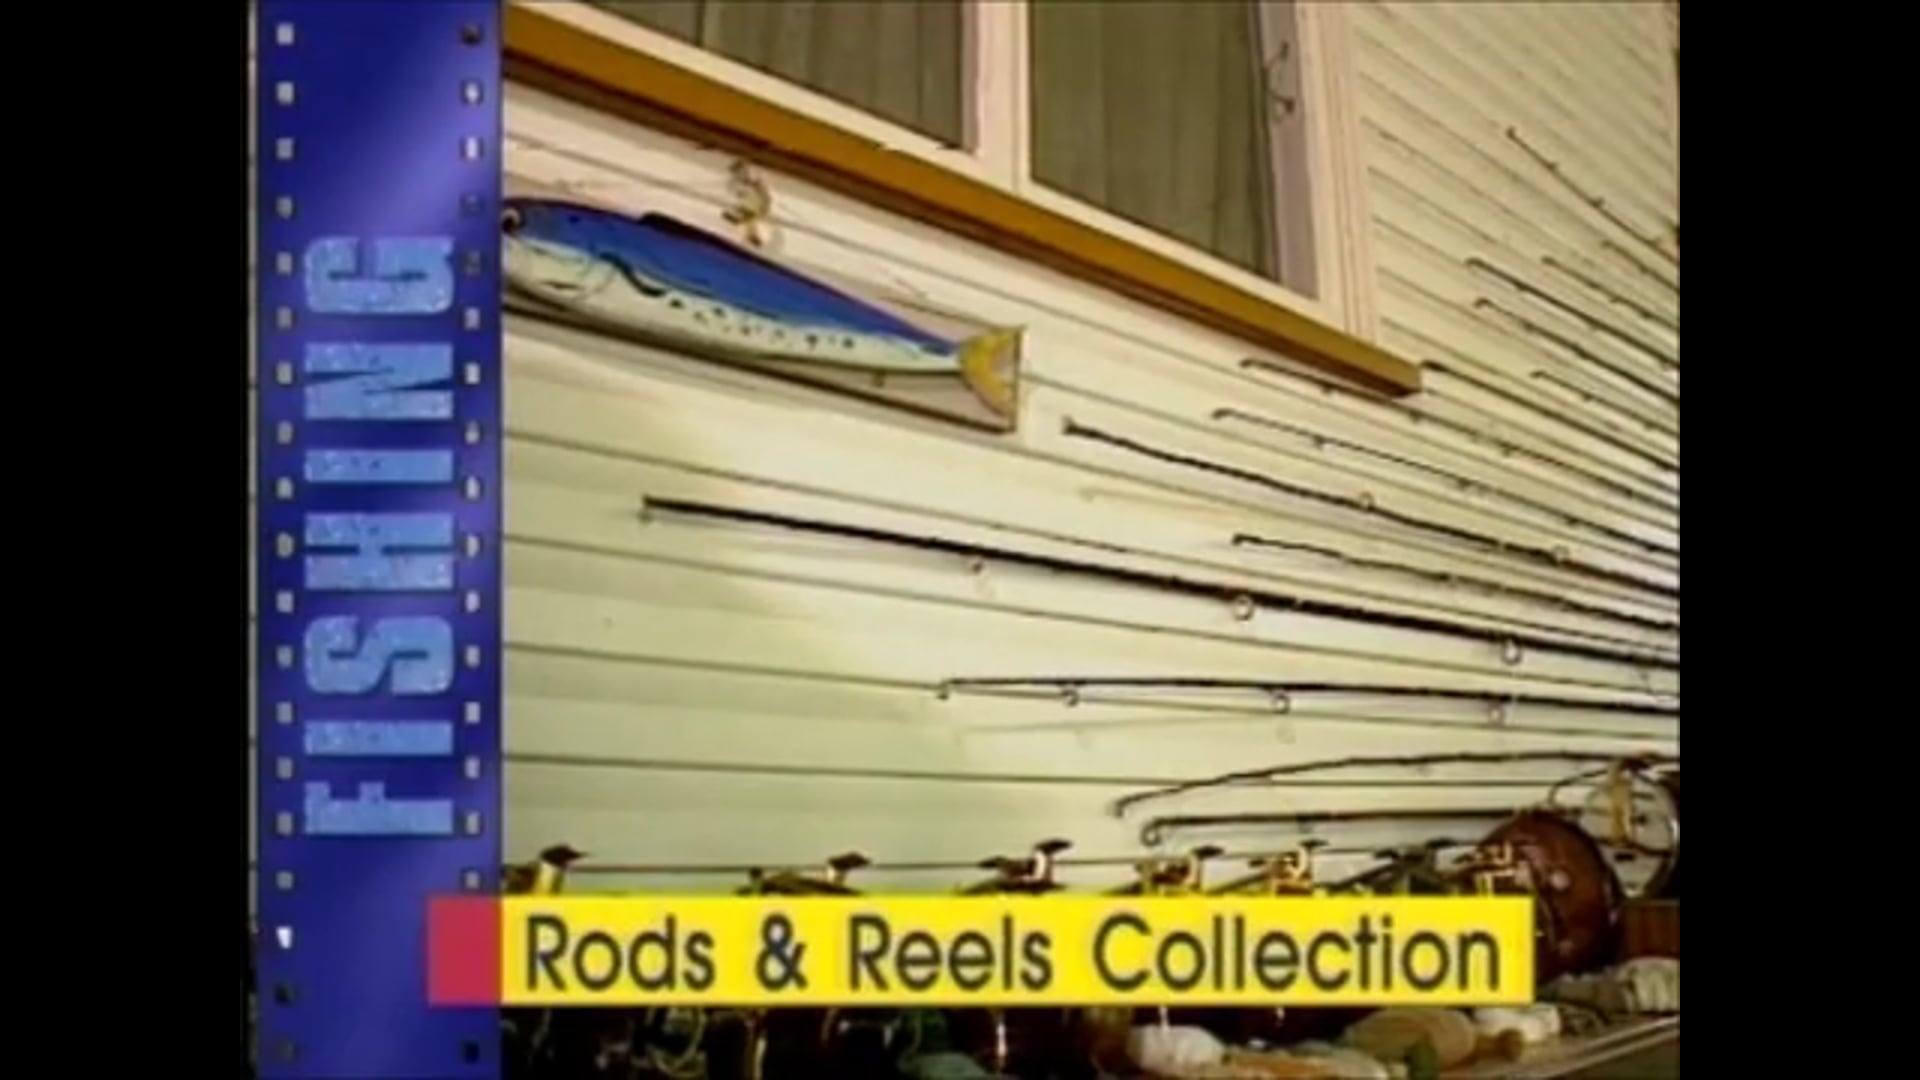 Rods & Reels Collection – Ron Price